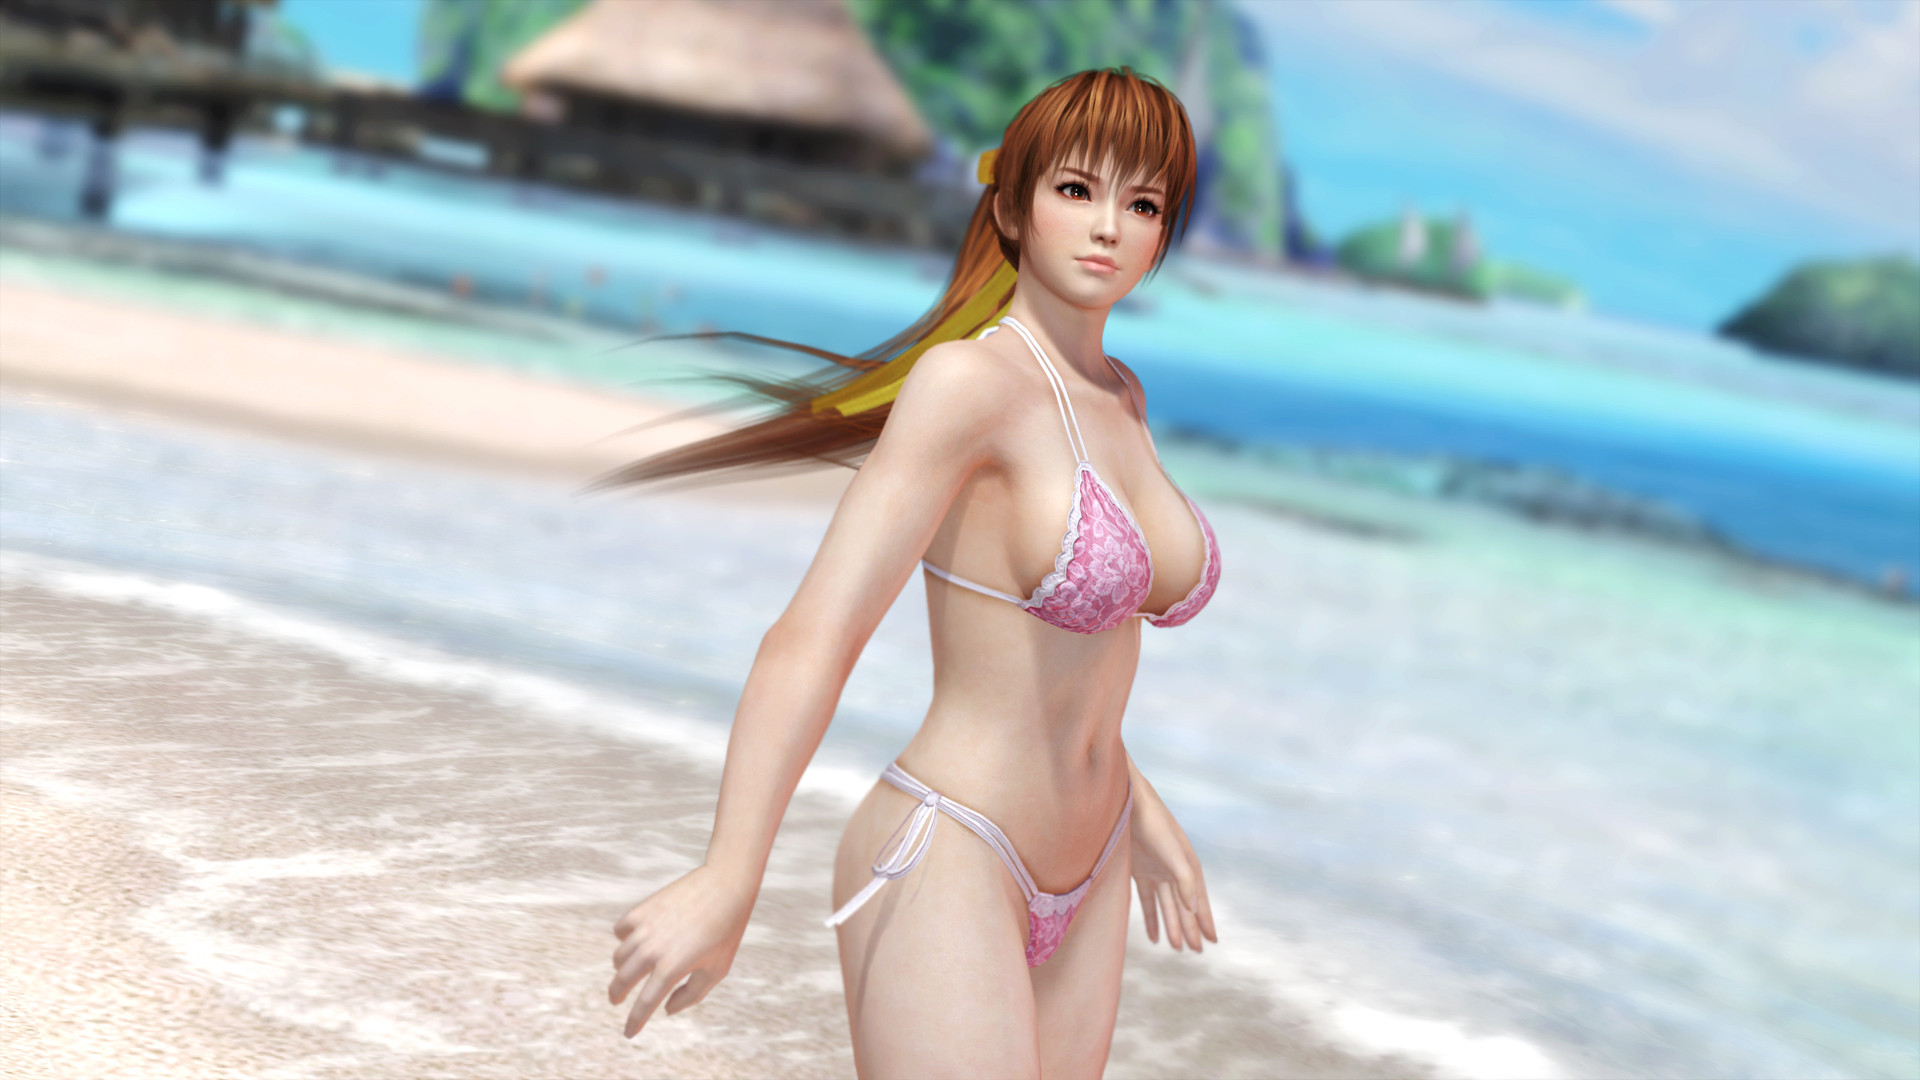 Nice Images Collection: Dead Or Alive 5 Desktop Wallpapers